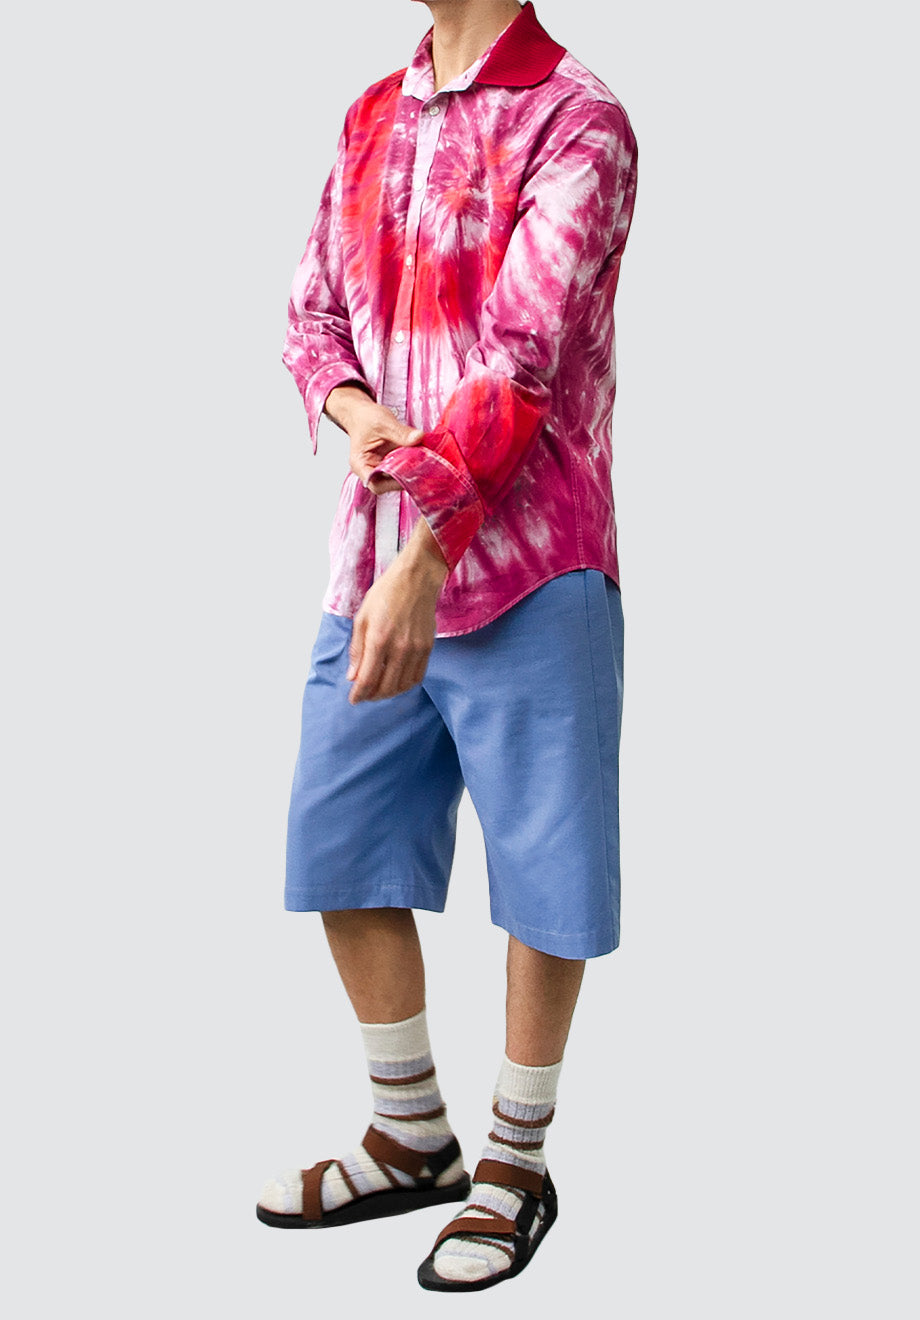 Tie Dye Shirt with Knit Collar | Red